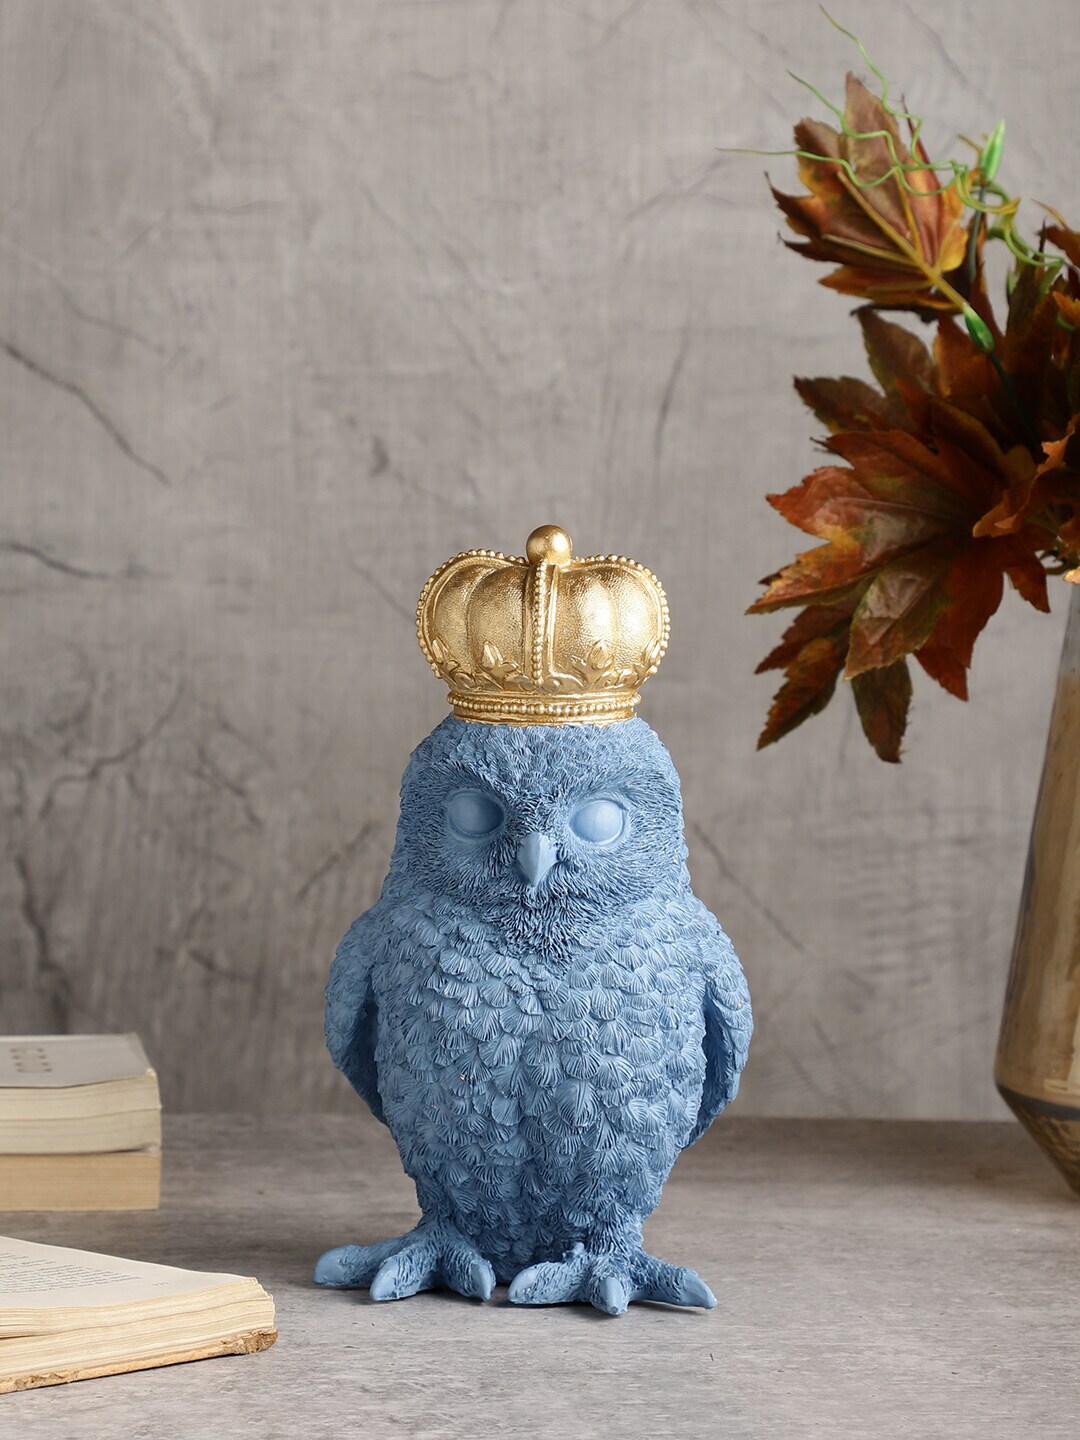 OddCroft Blue Gold-Toned Royal Owl Sculpture Showpiece Price in India